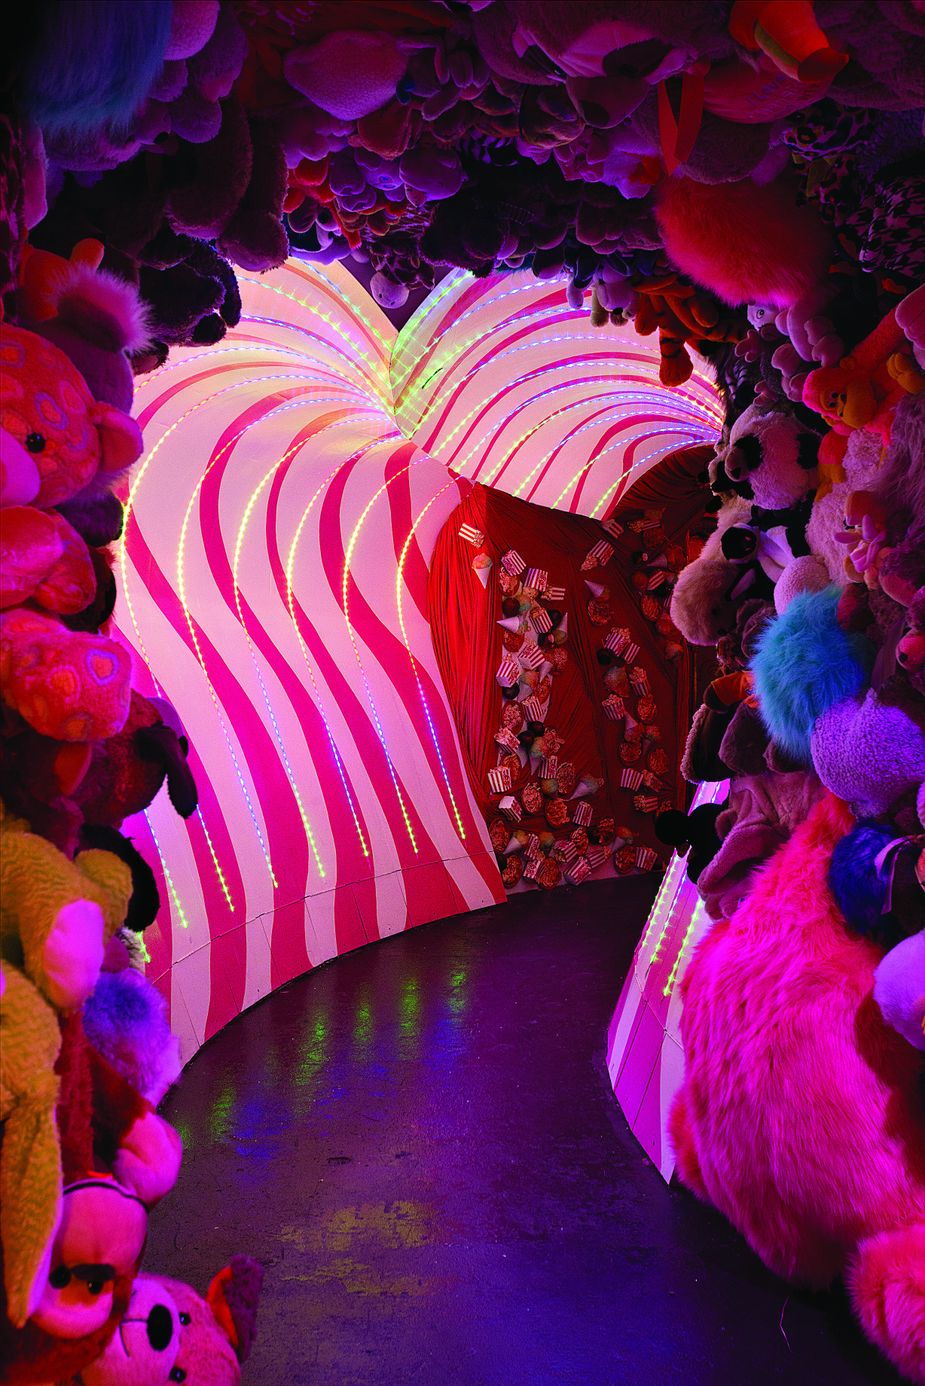 A hundred thirty-six stuffed animals line one of the winding whimsical hallways at Mix-Tape. The group relies on many donated items to create its installations. Photo by John Jernigan.